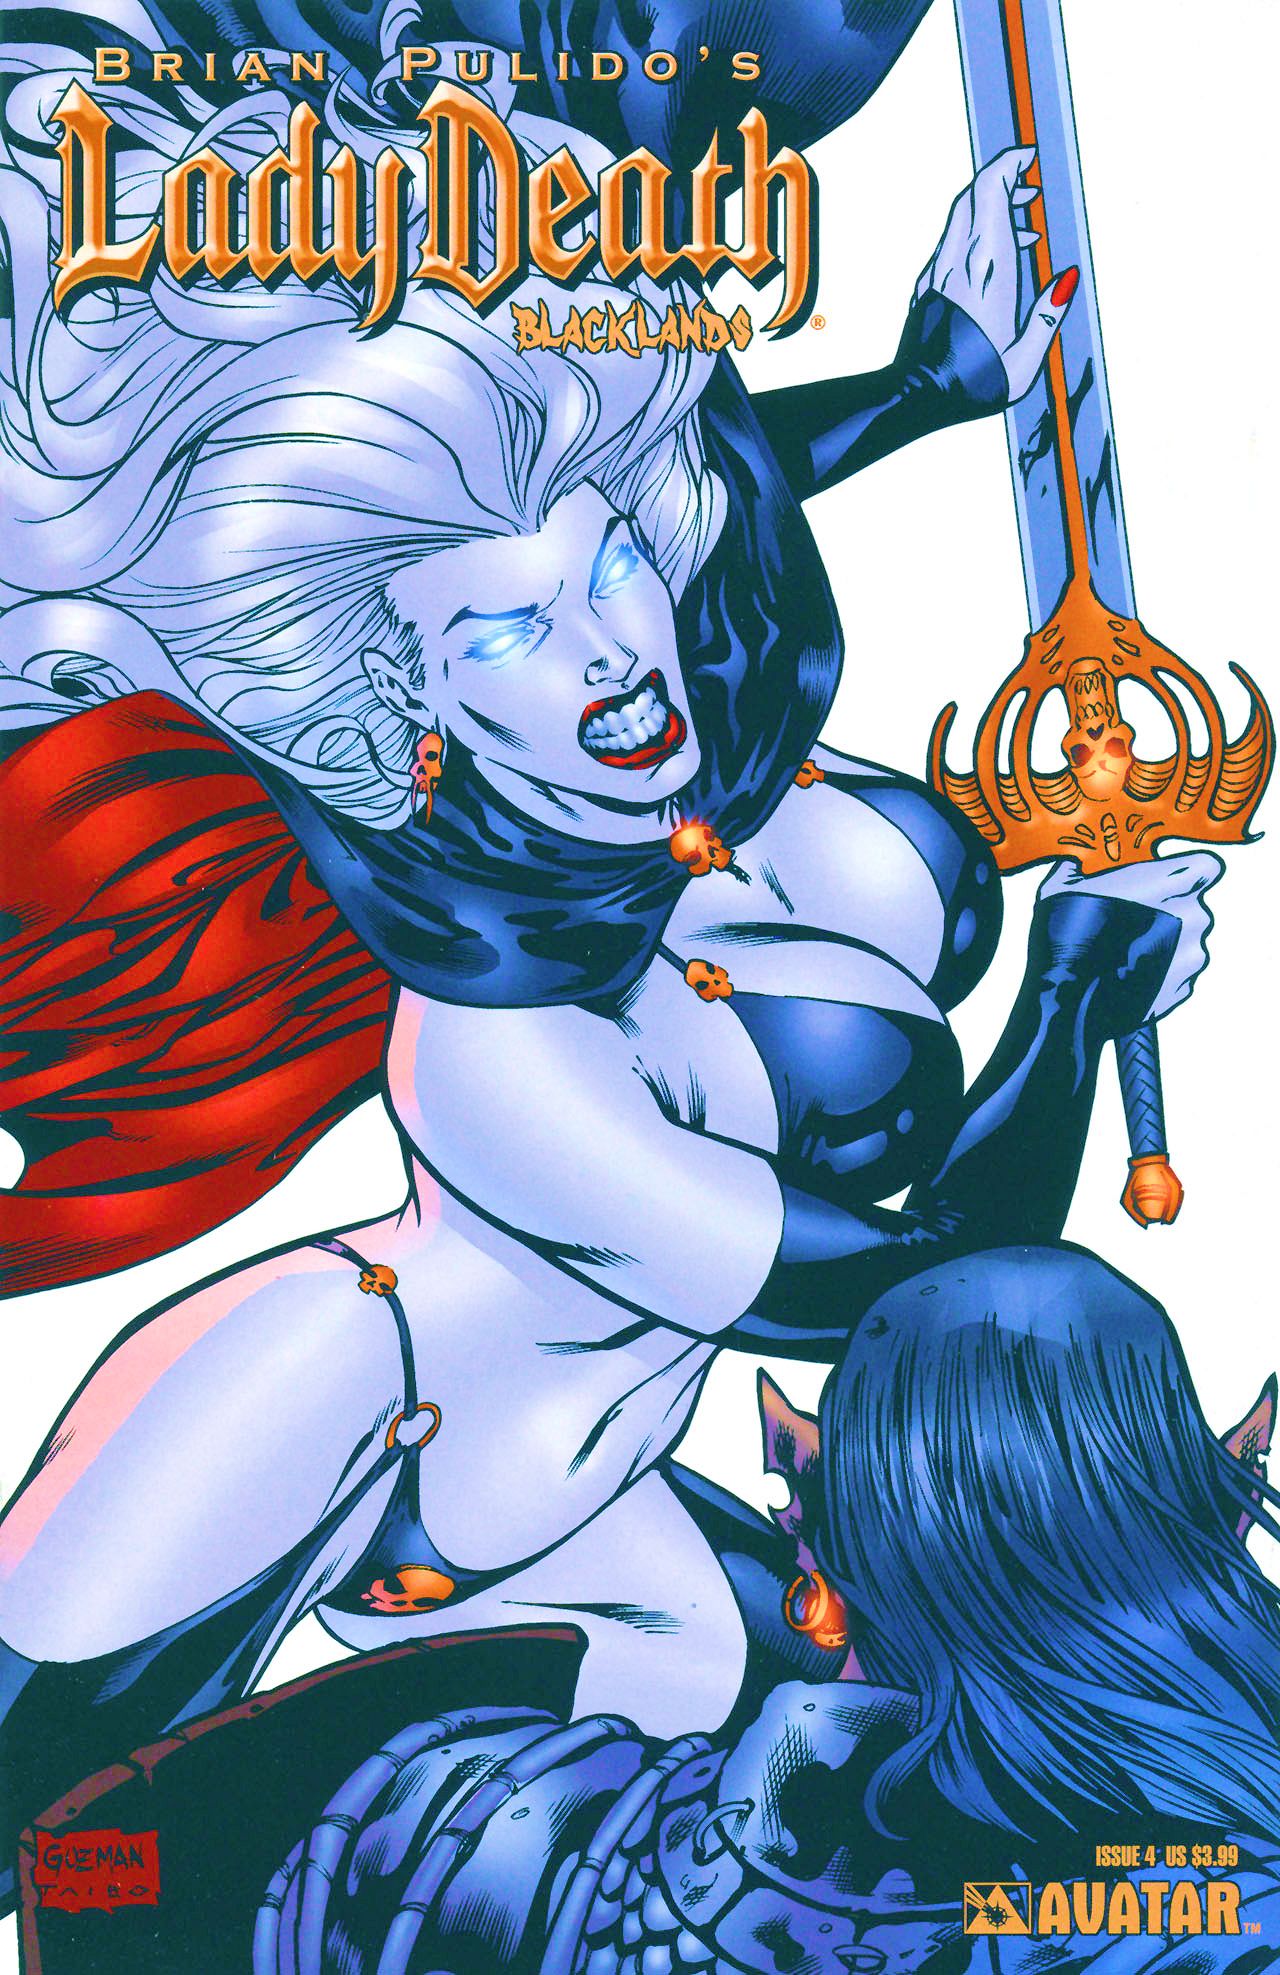 Read online Brian Pulido's Lady Death: Blacklands comic -  Issue #4 - 1